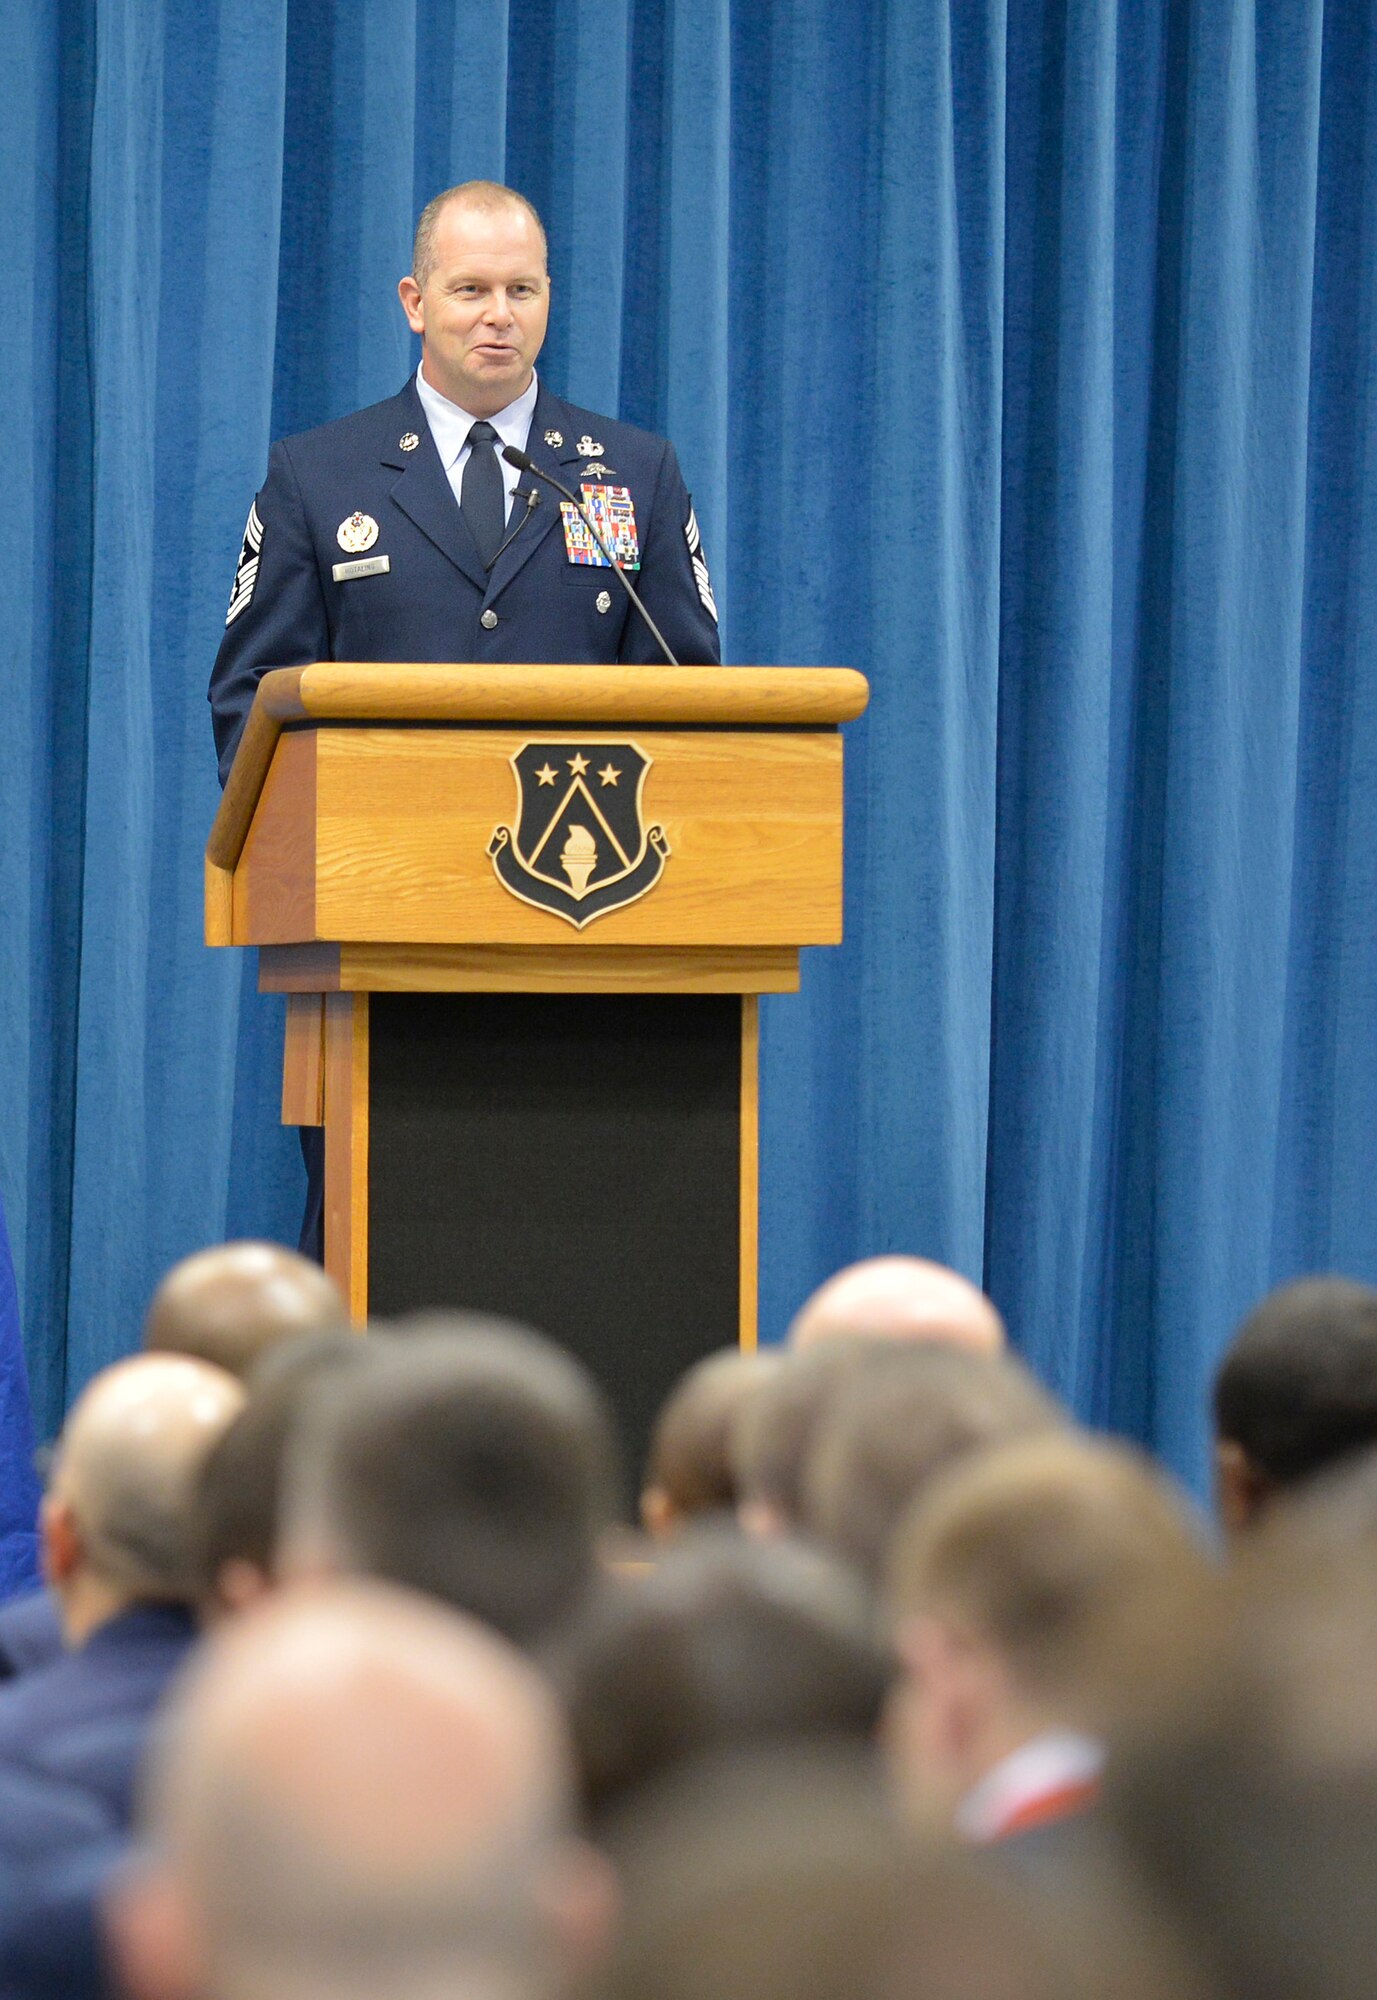 Chief Master Sgt. Jim Hotaling, Command Chief Master Sergeant of the Air National Guard, speaks to Airmen and Coast Guardsmen graduating from the Paul H. Lankford EPME Academy at the I. G. Brown Training and Education Center, here Feb. 14, 2013. Students attending the Noncommissioned Officers Academy and Airmen Leadership School totaled 314 for the six and five week classes. (National Guard photo by Master Sgt. Kurt Skoglund/Released)